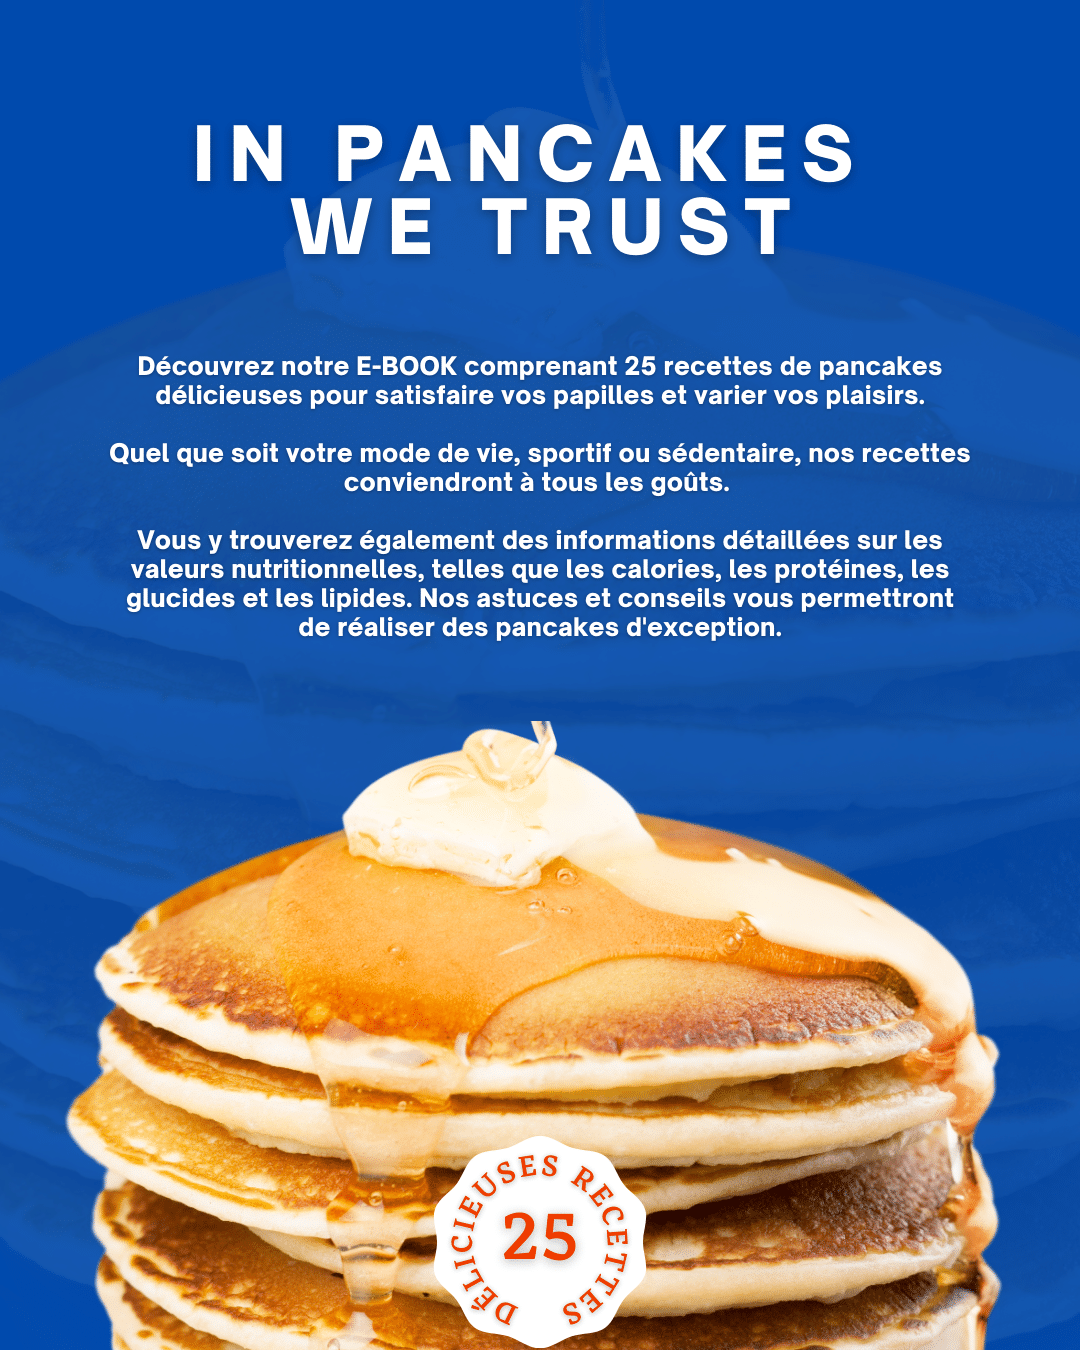 In pancakes we trust - home